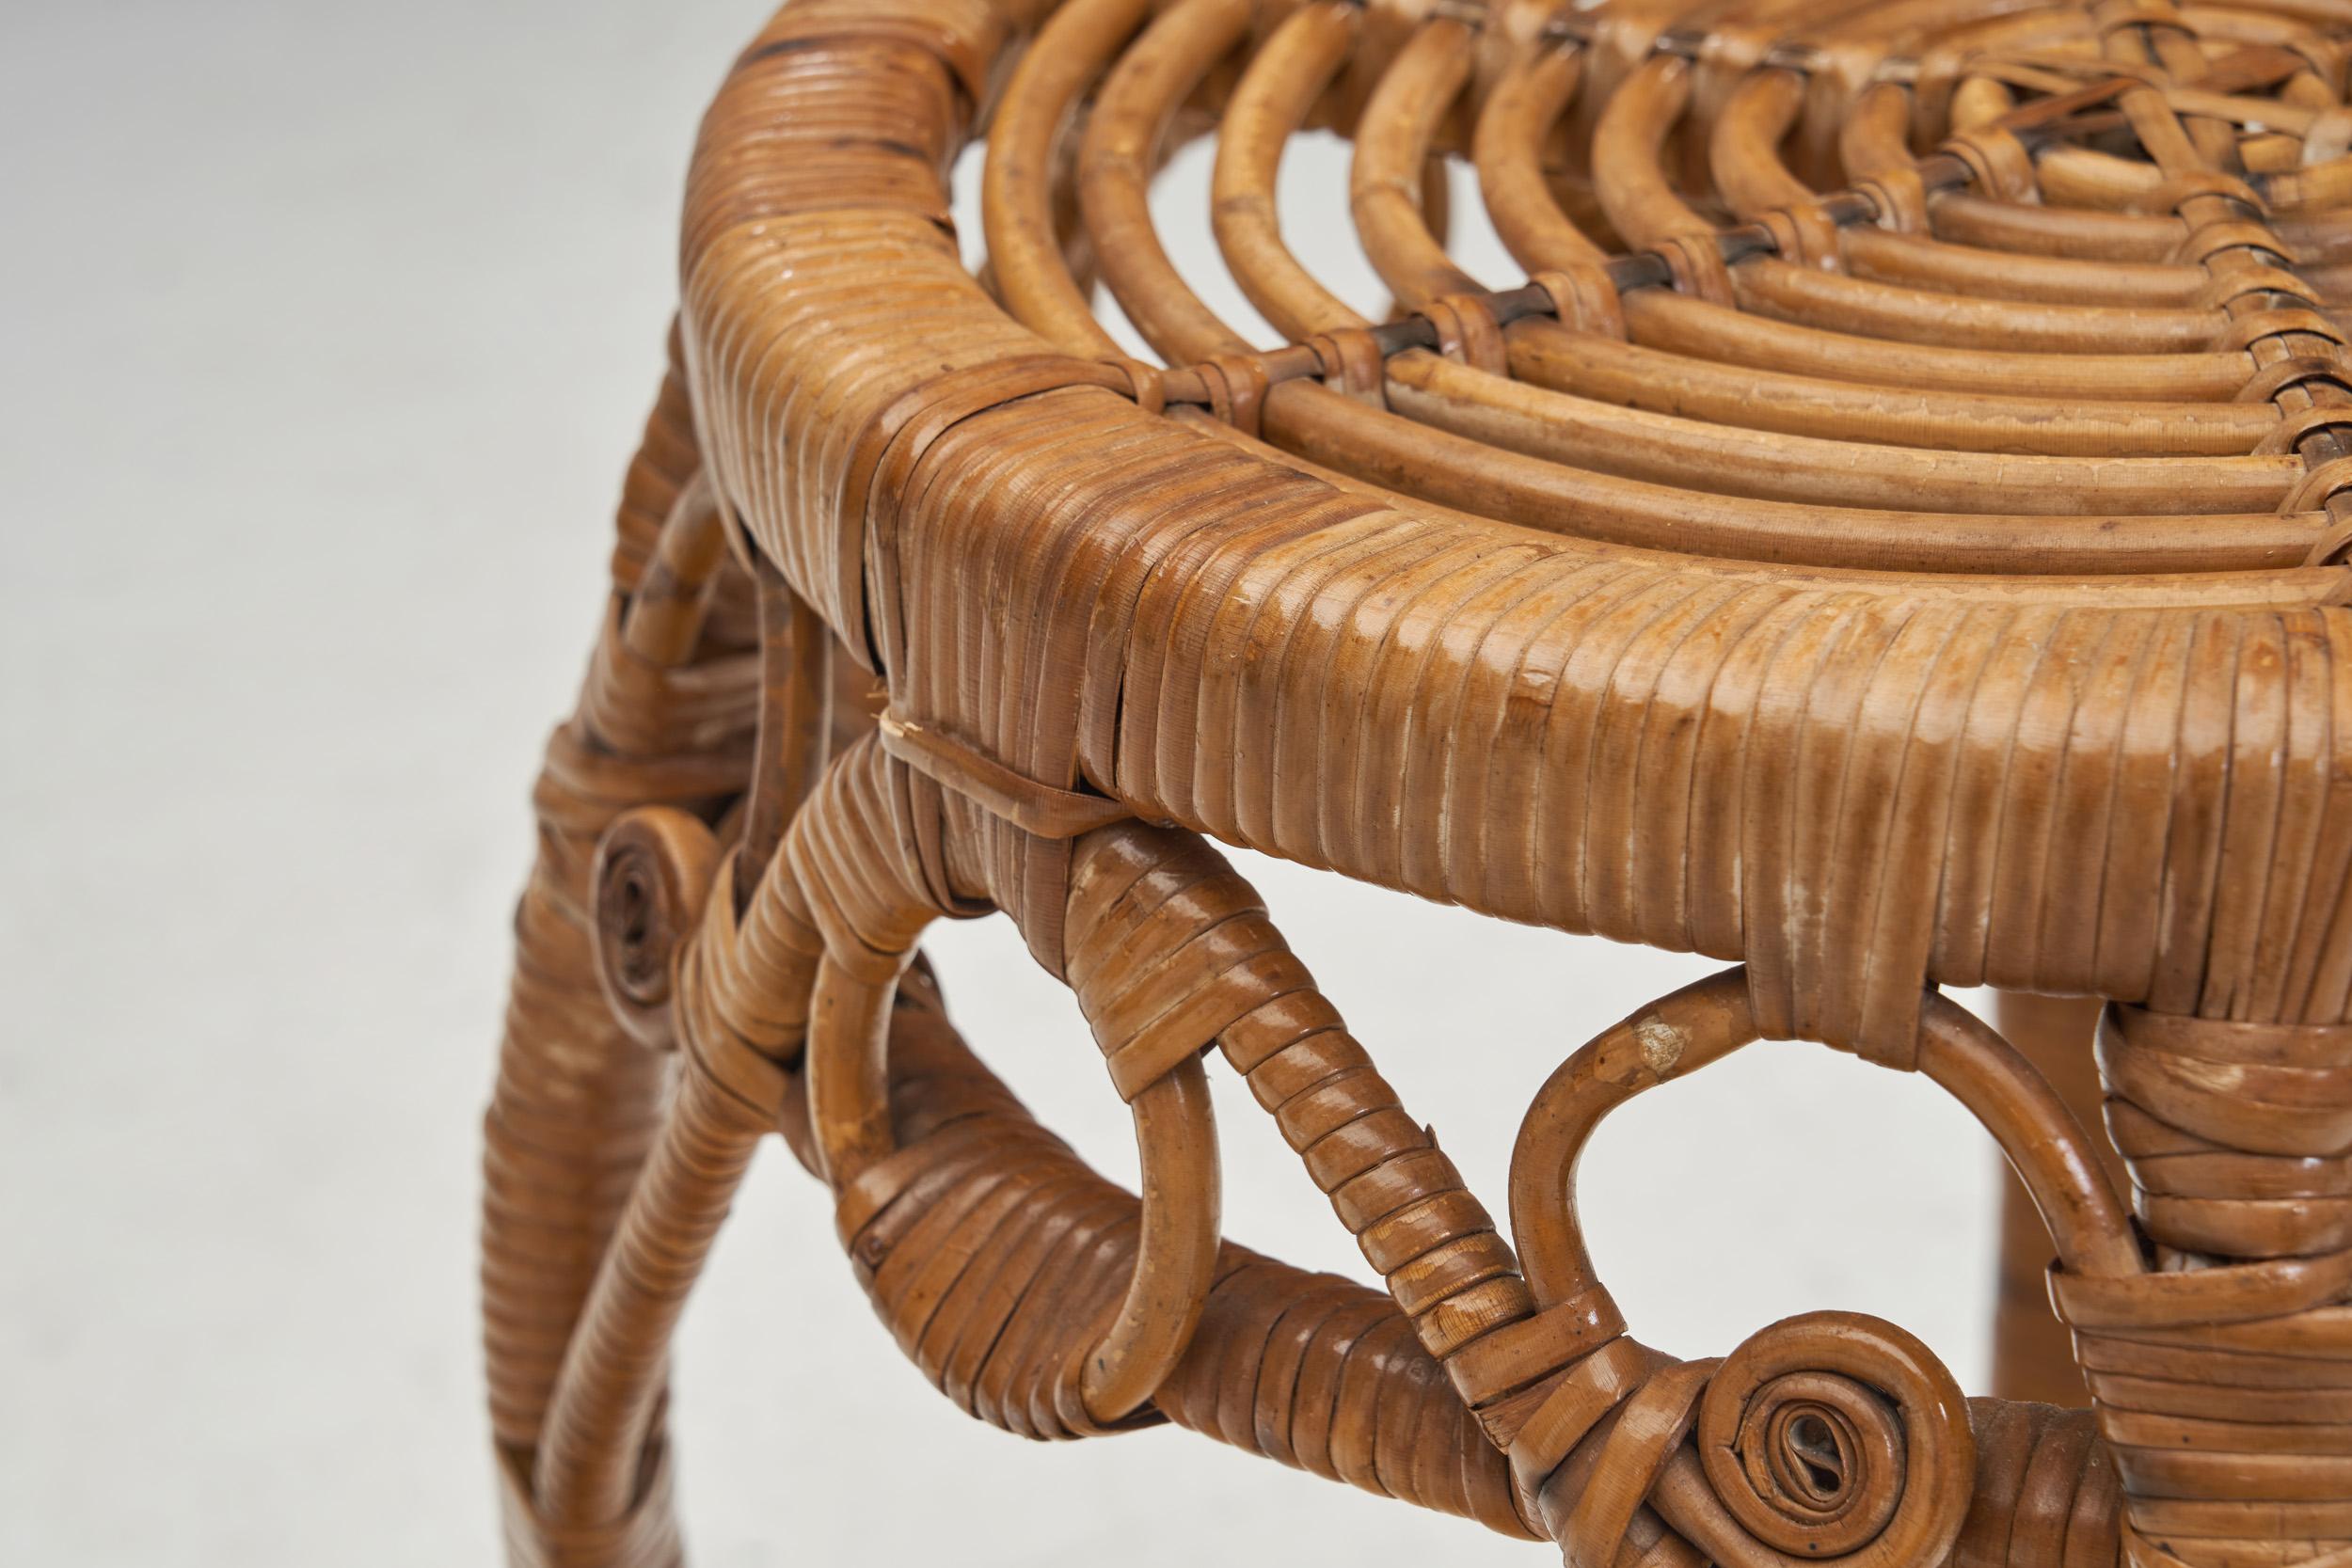 Woven Rattan Stool, Europe Early 20th Century For Sale 6